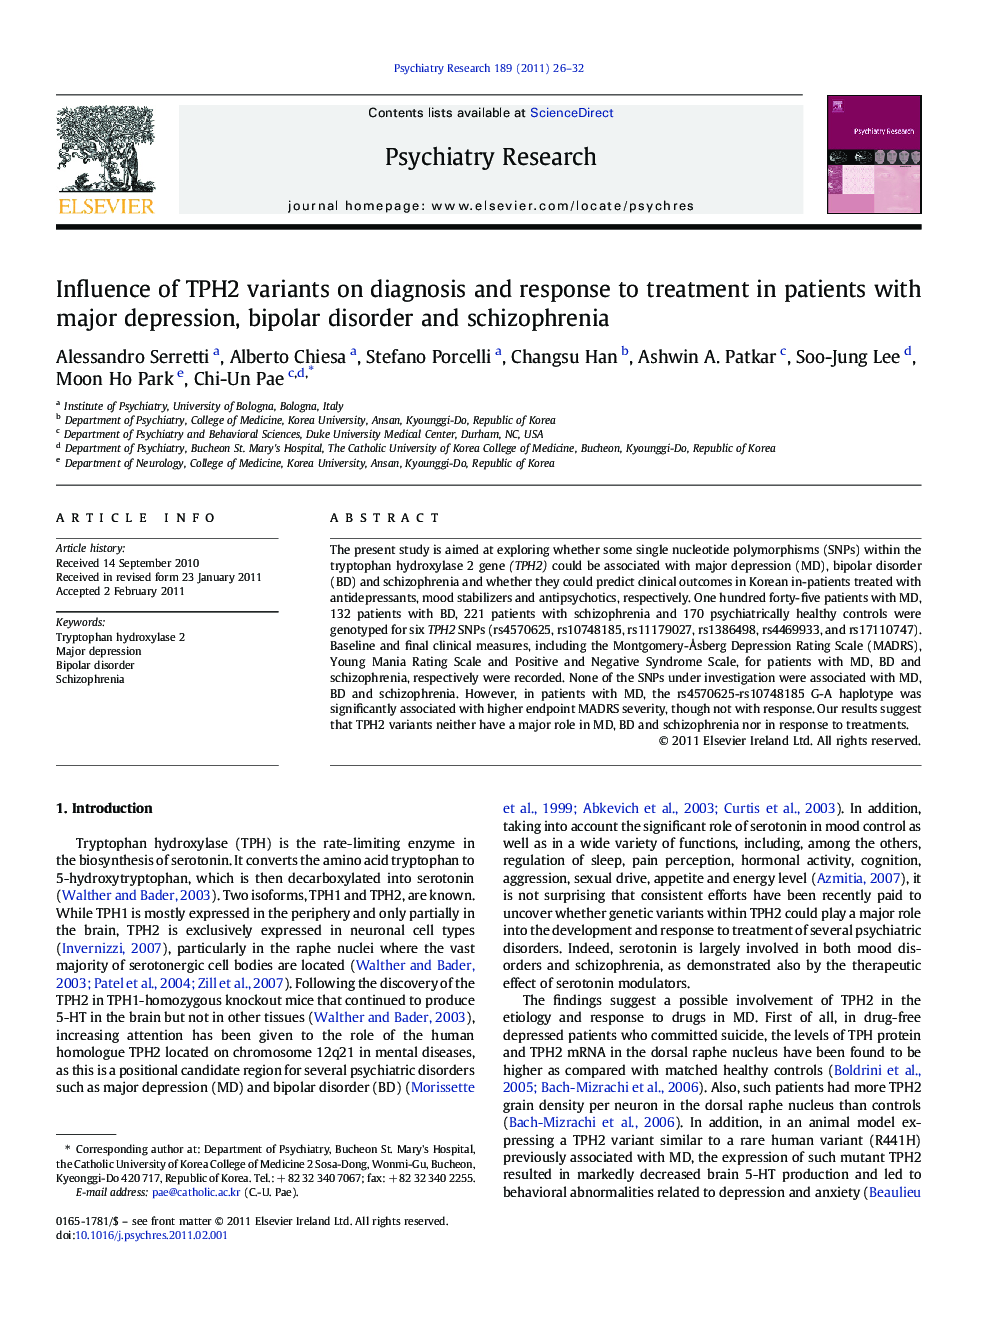 Influence of TPH2 variants on diagnosis and response to treatment in patients with major depression, bipolar disorder and schizophrenia